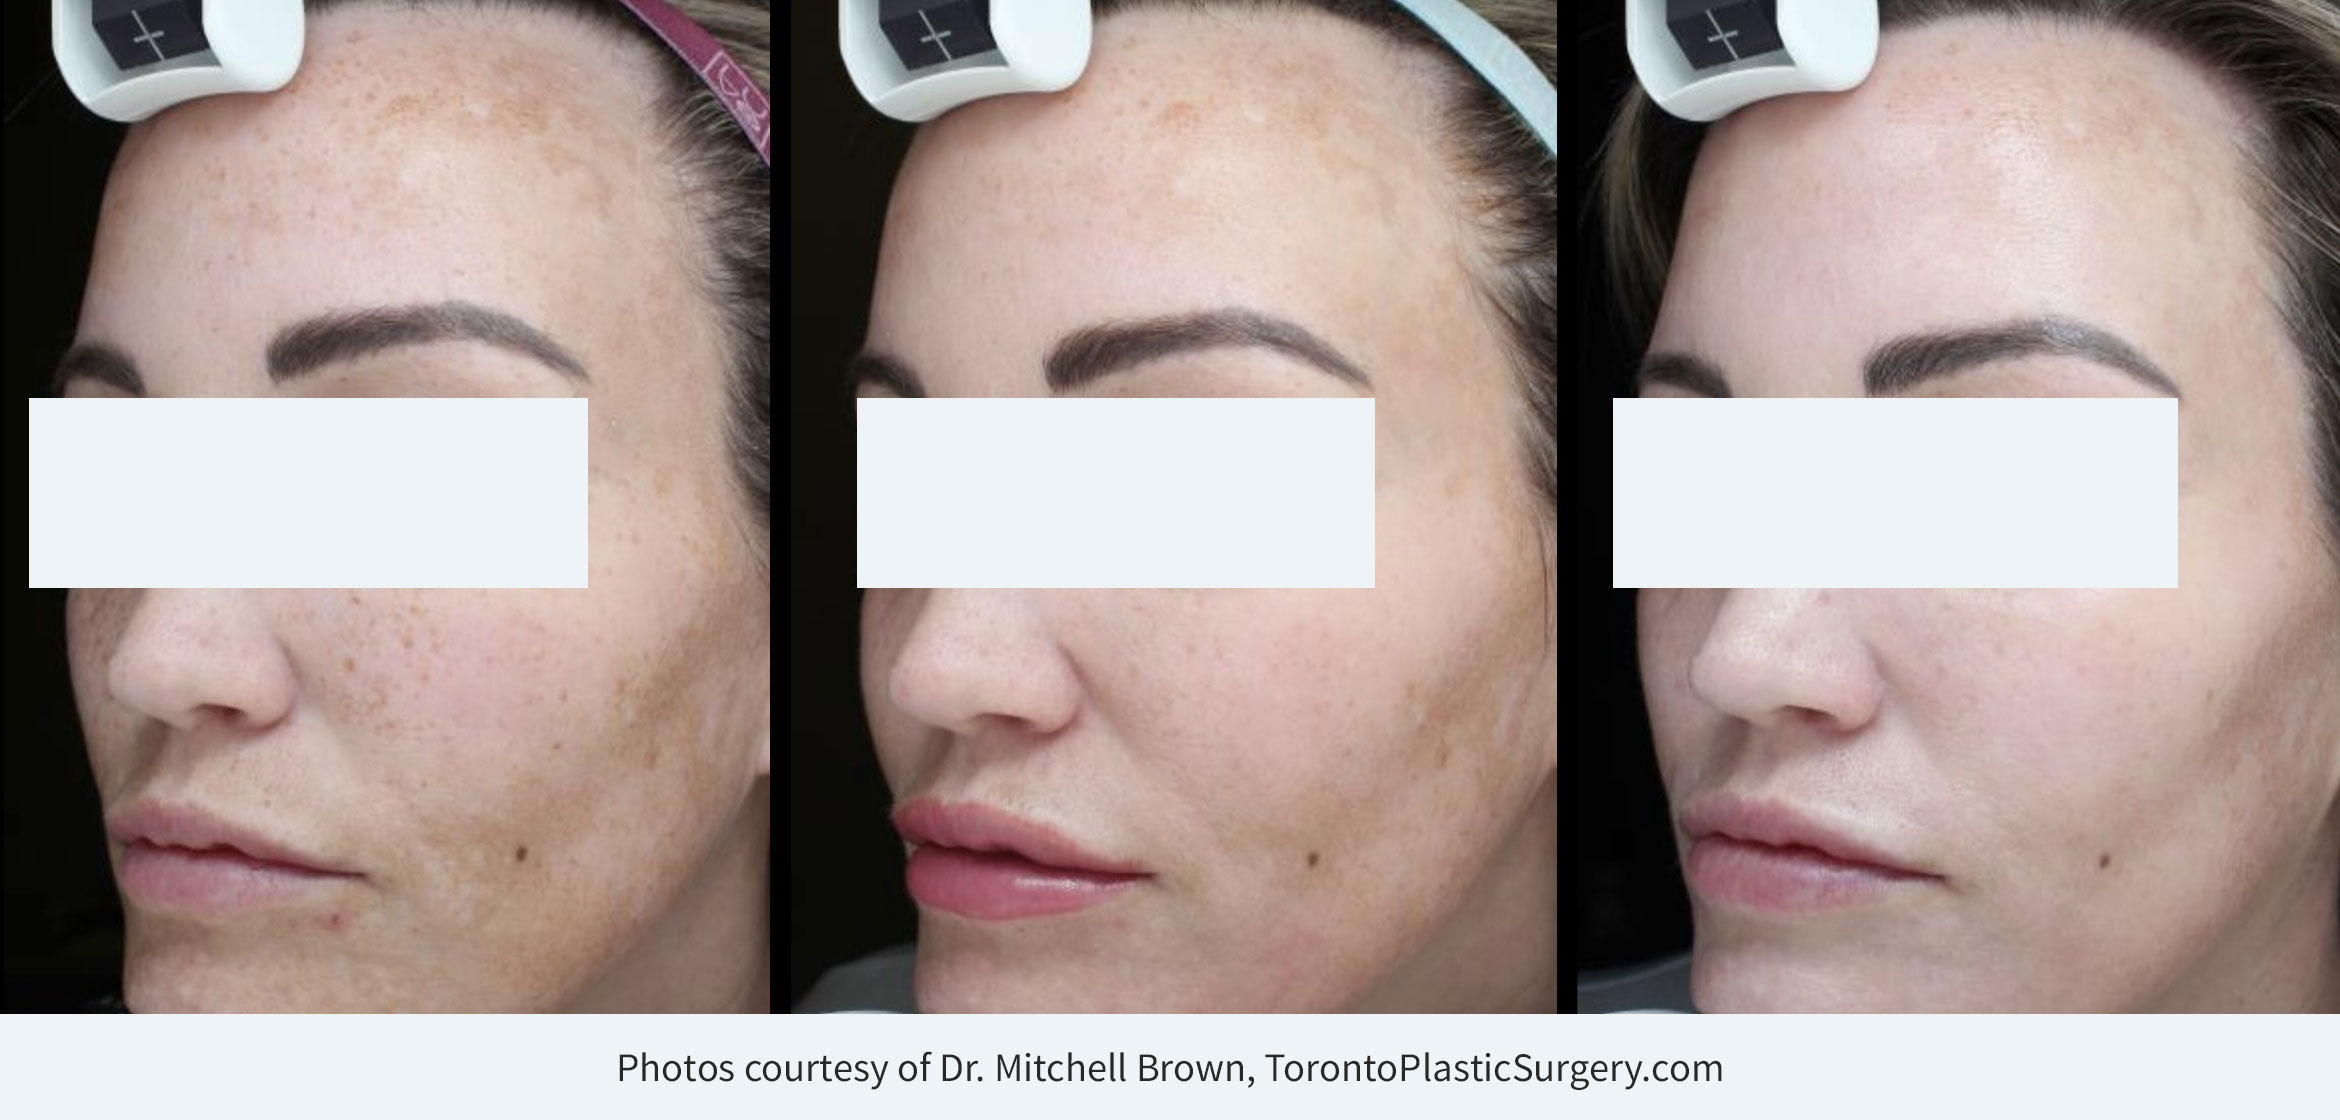 Derm-eclat Melasma and Hyperpigmentation TreatmentBefore/day of treatment start (left), after 2 week touch-up (middle), 1 month post treatment (right).